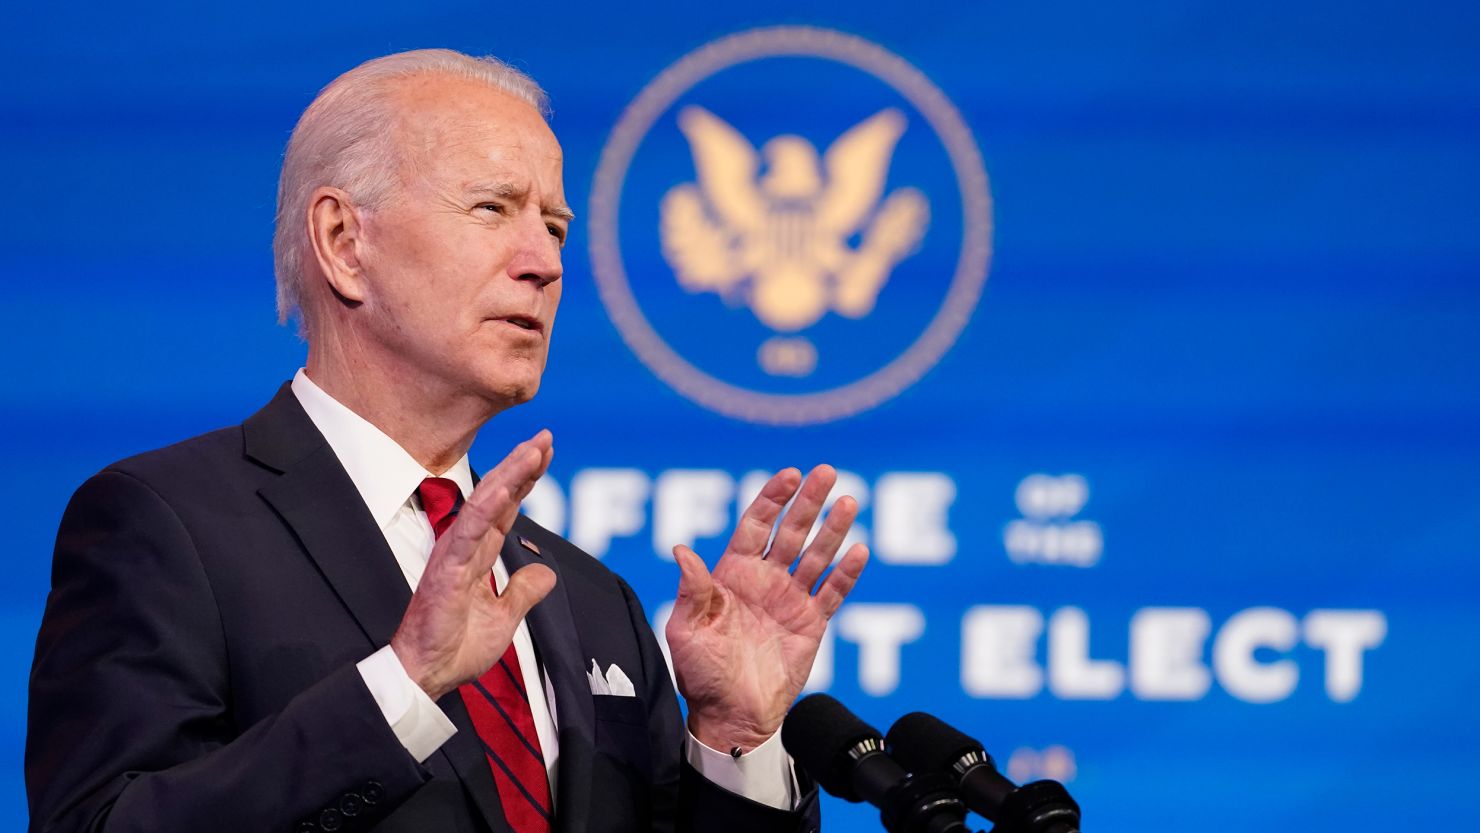 President-elect Joe Biden speaks during an event at The Queen theater, Friday, January 15, in Wilmington, Delaware.